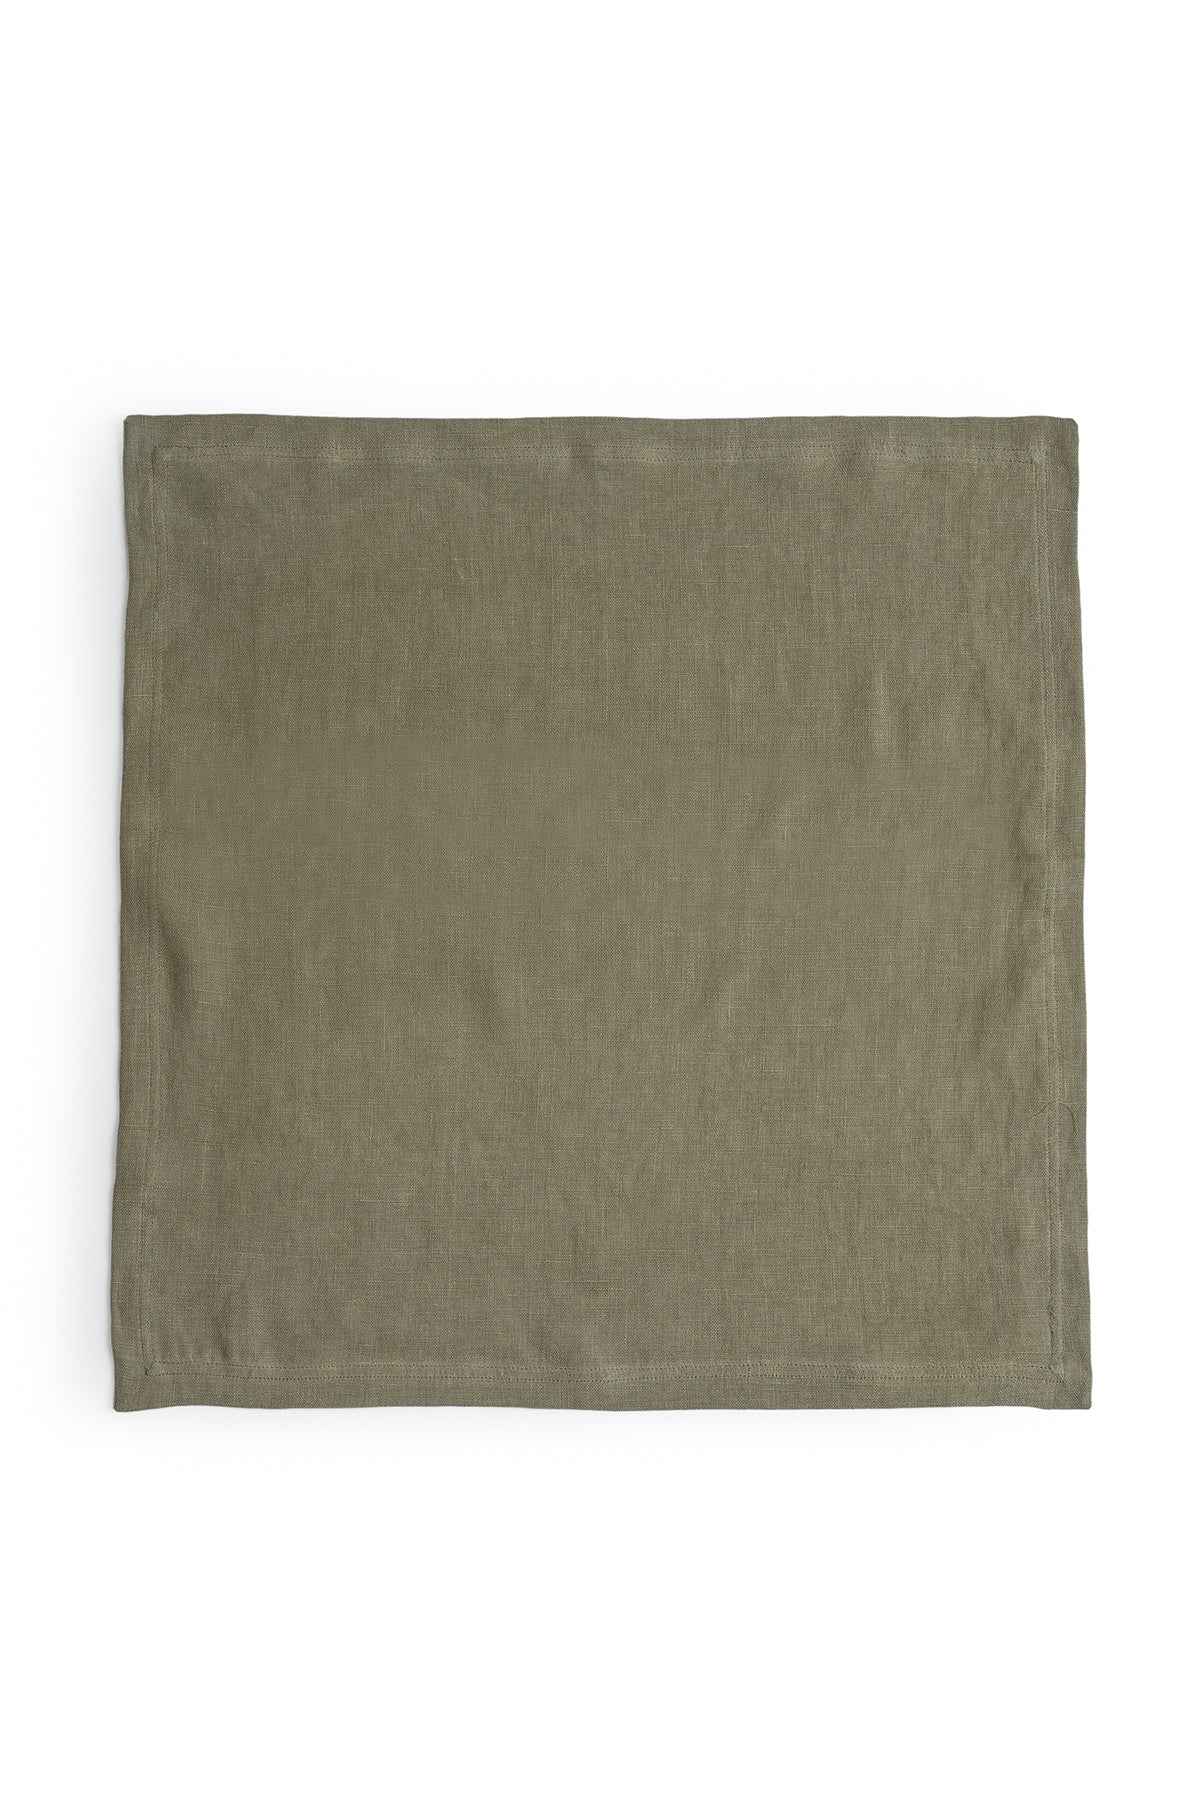   A green LINEN NAPKIN, an everyday kitchen essential, on a white background with a luxe finish from Jenny Graham Home. 